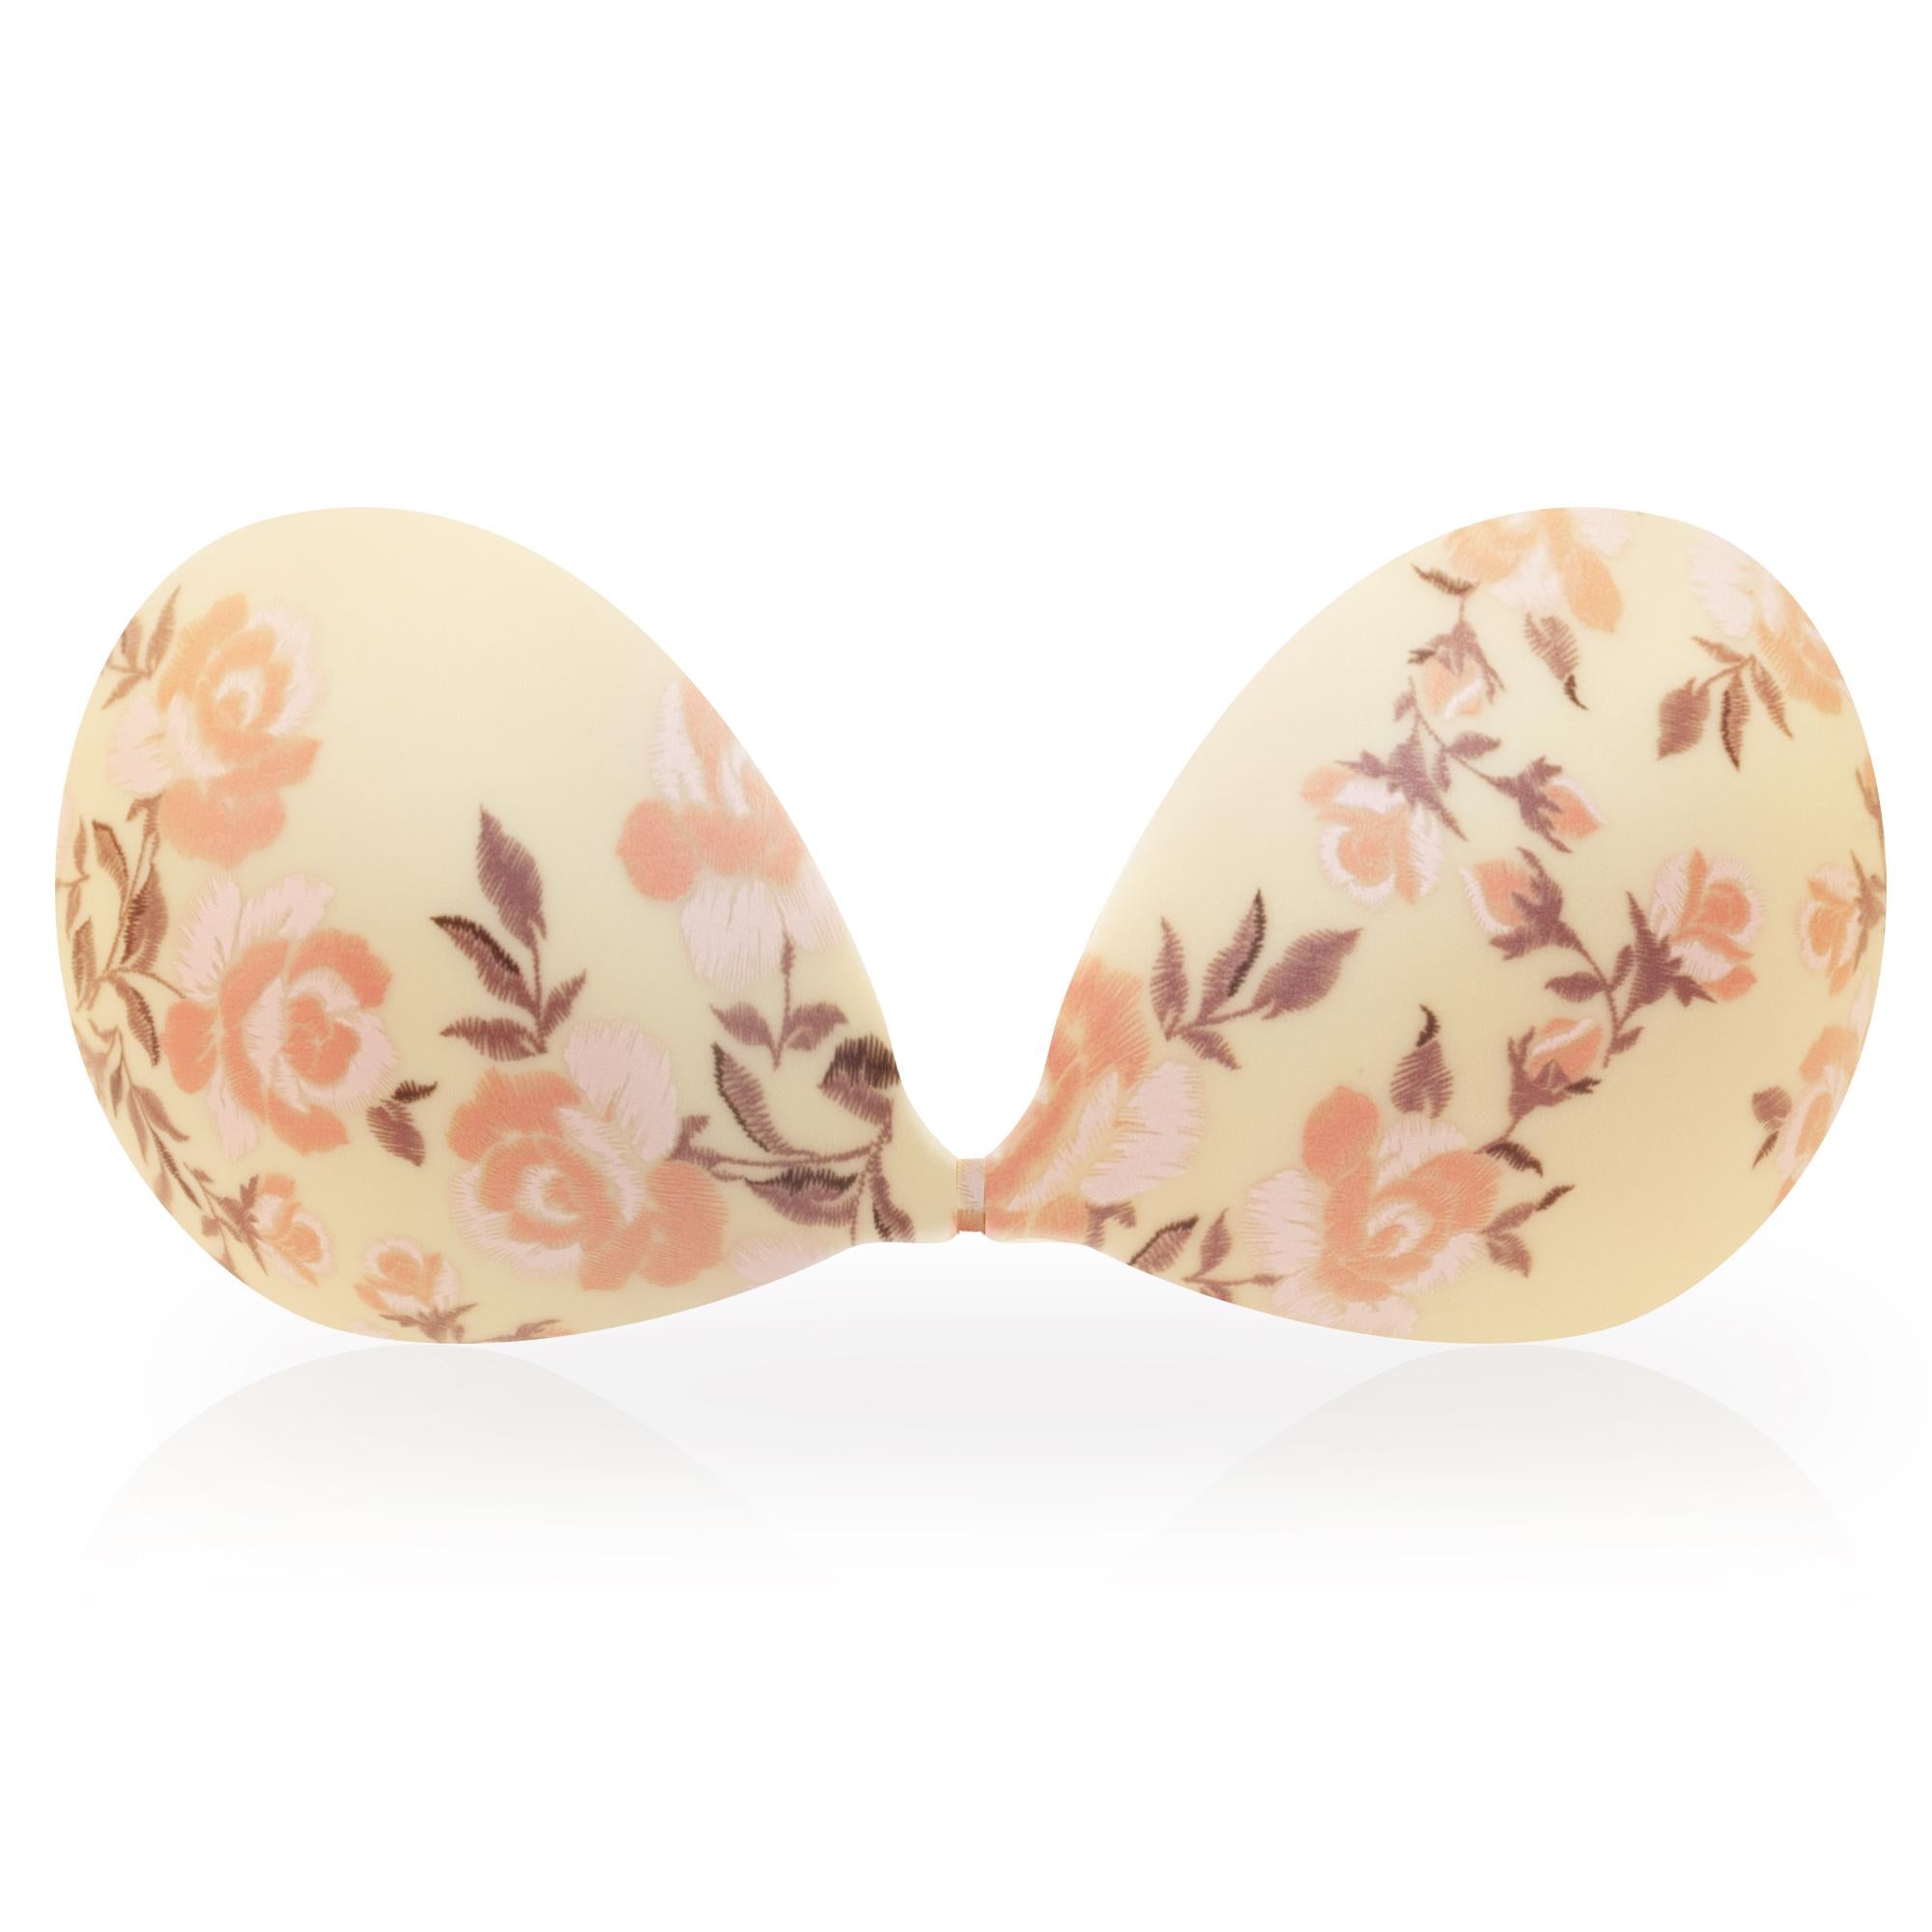 Leaf Bra - Invisibility Push up Bra, Backless Bra, Invisible